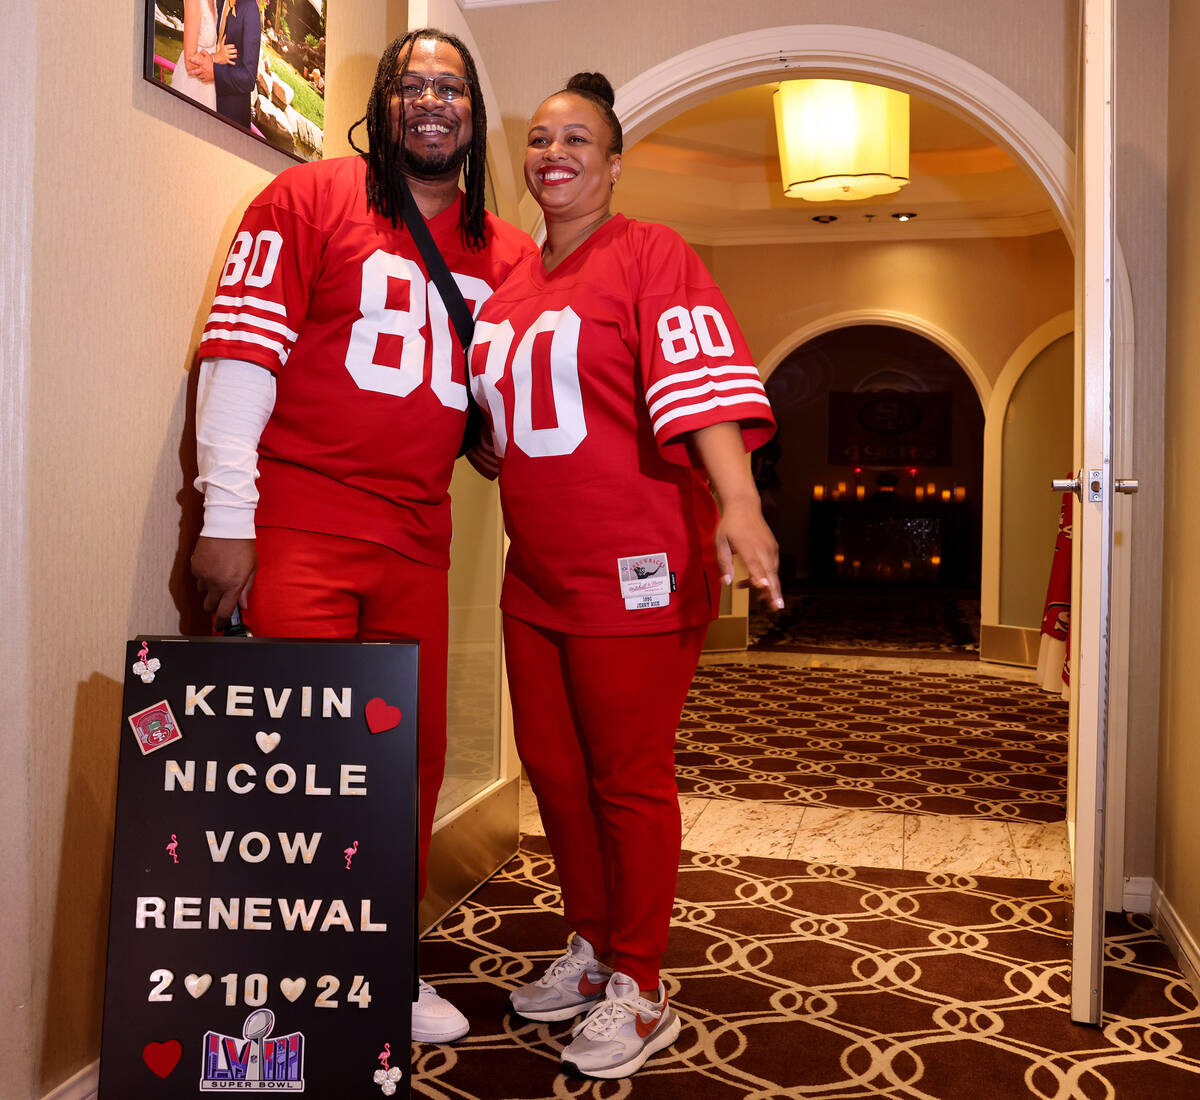 Nicole and Kevin Crockrom of Las Vegas pose with their sign before renewing their wedding vows ...